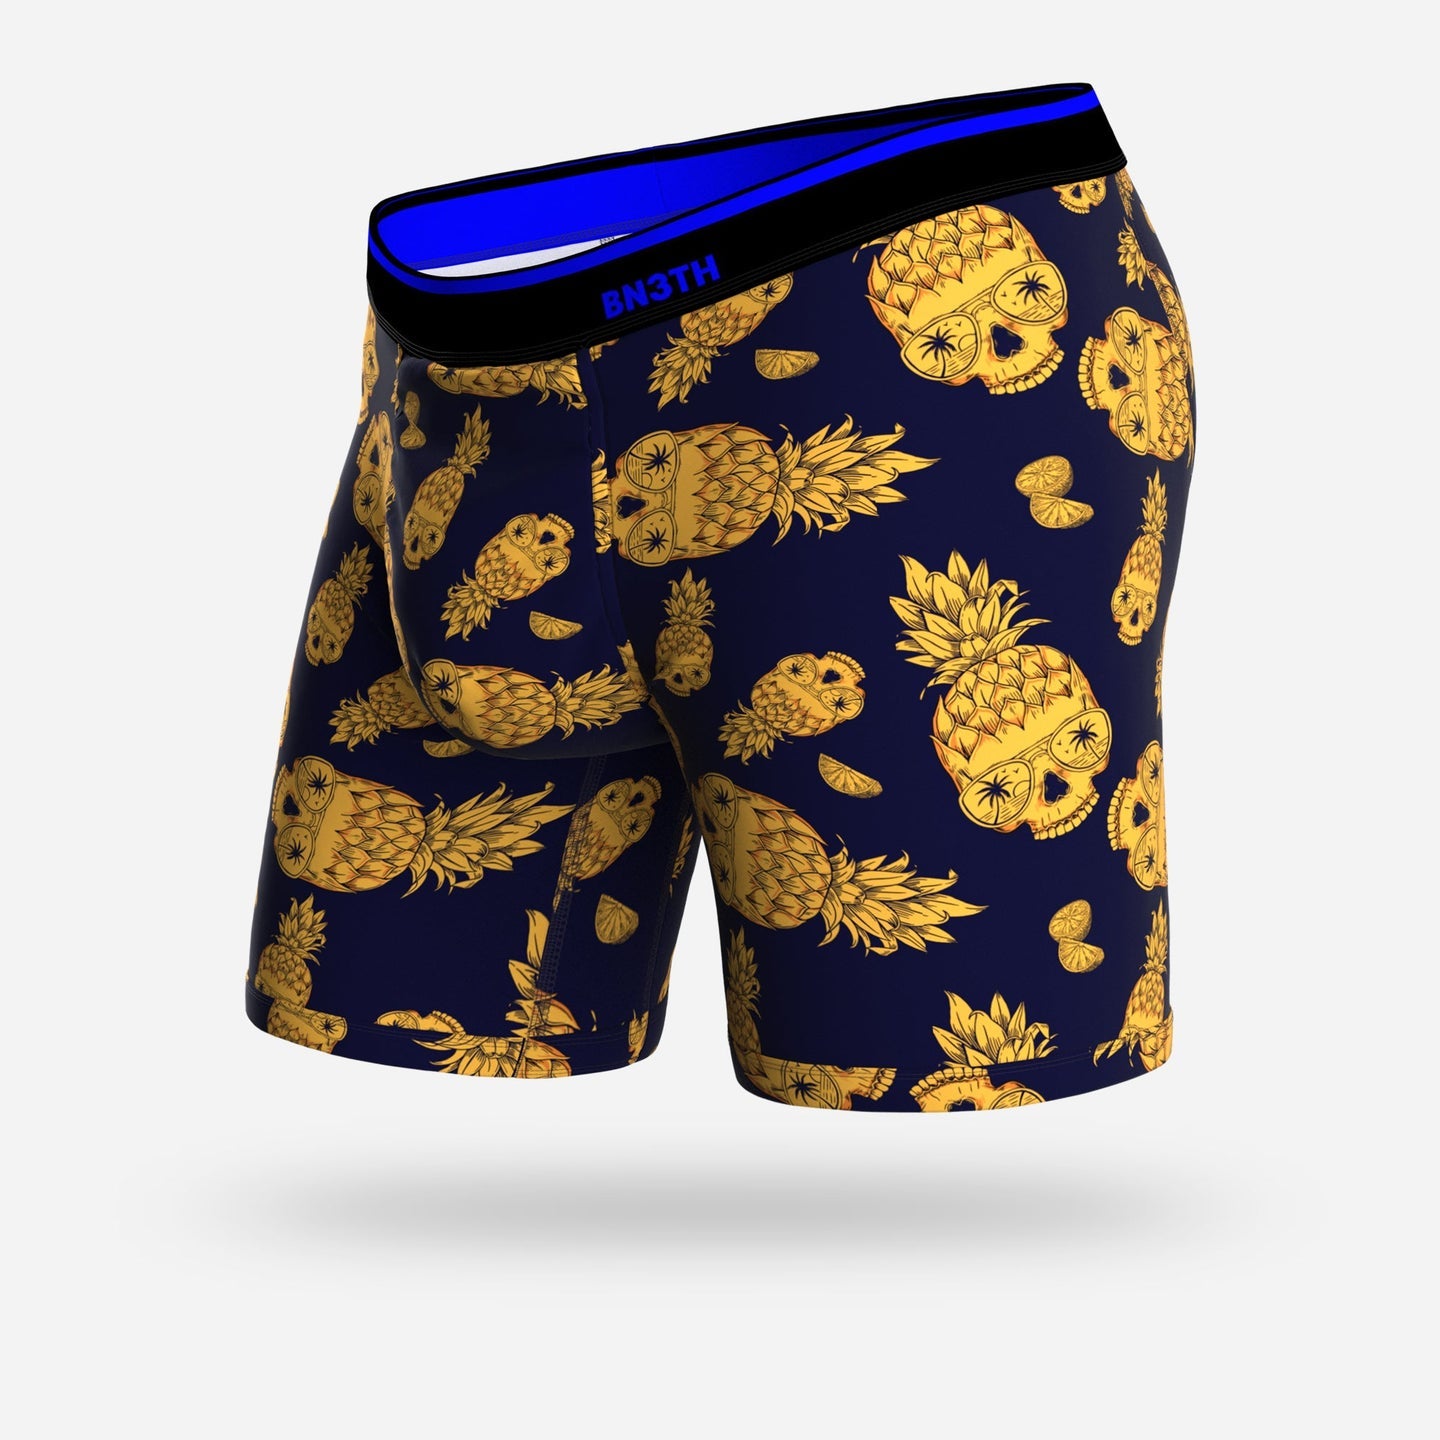 BN3TH // BOXER HOMME BRIEF ALL INCLUSIVE NAVY